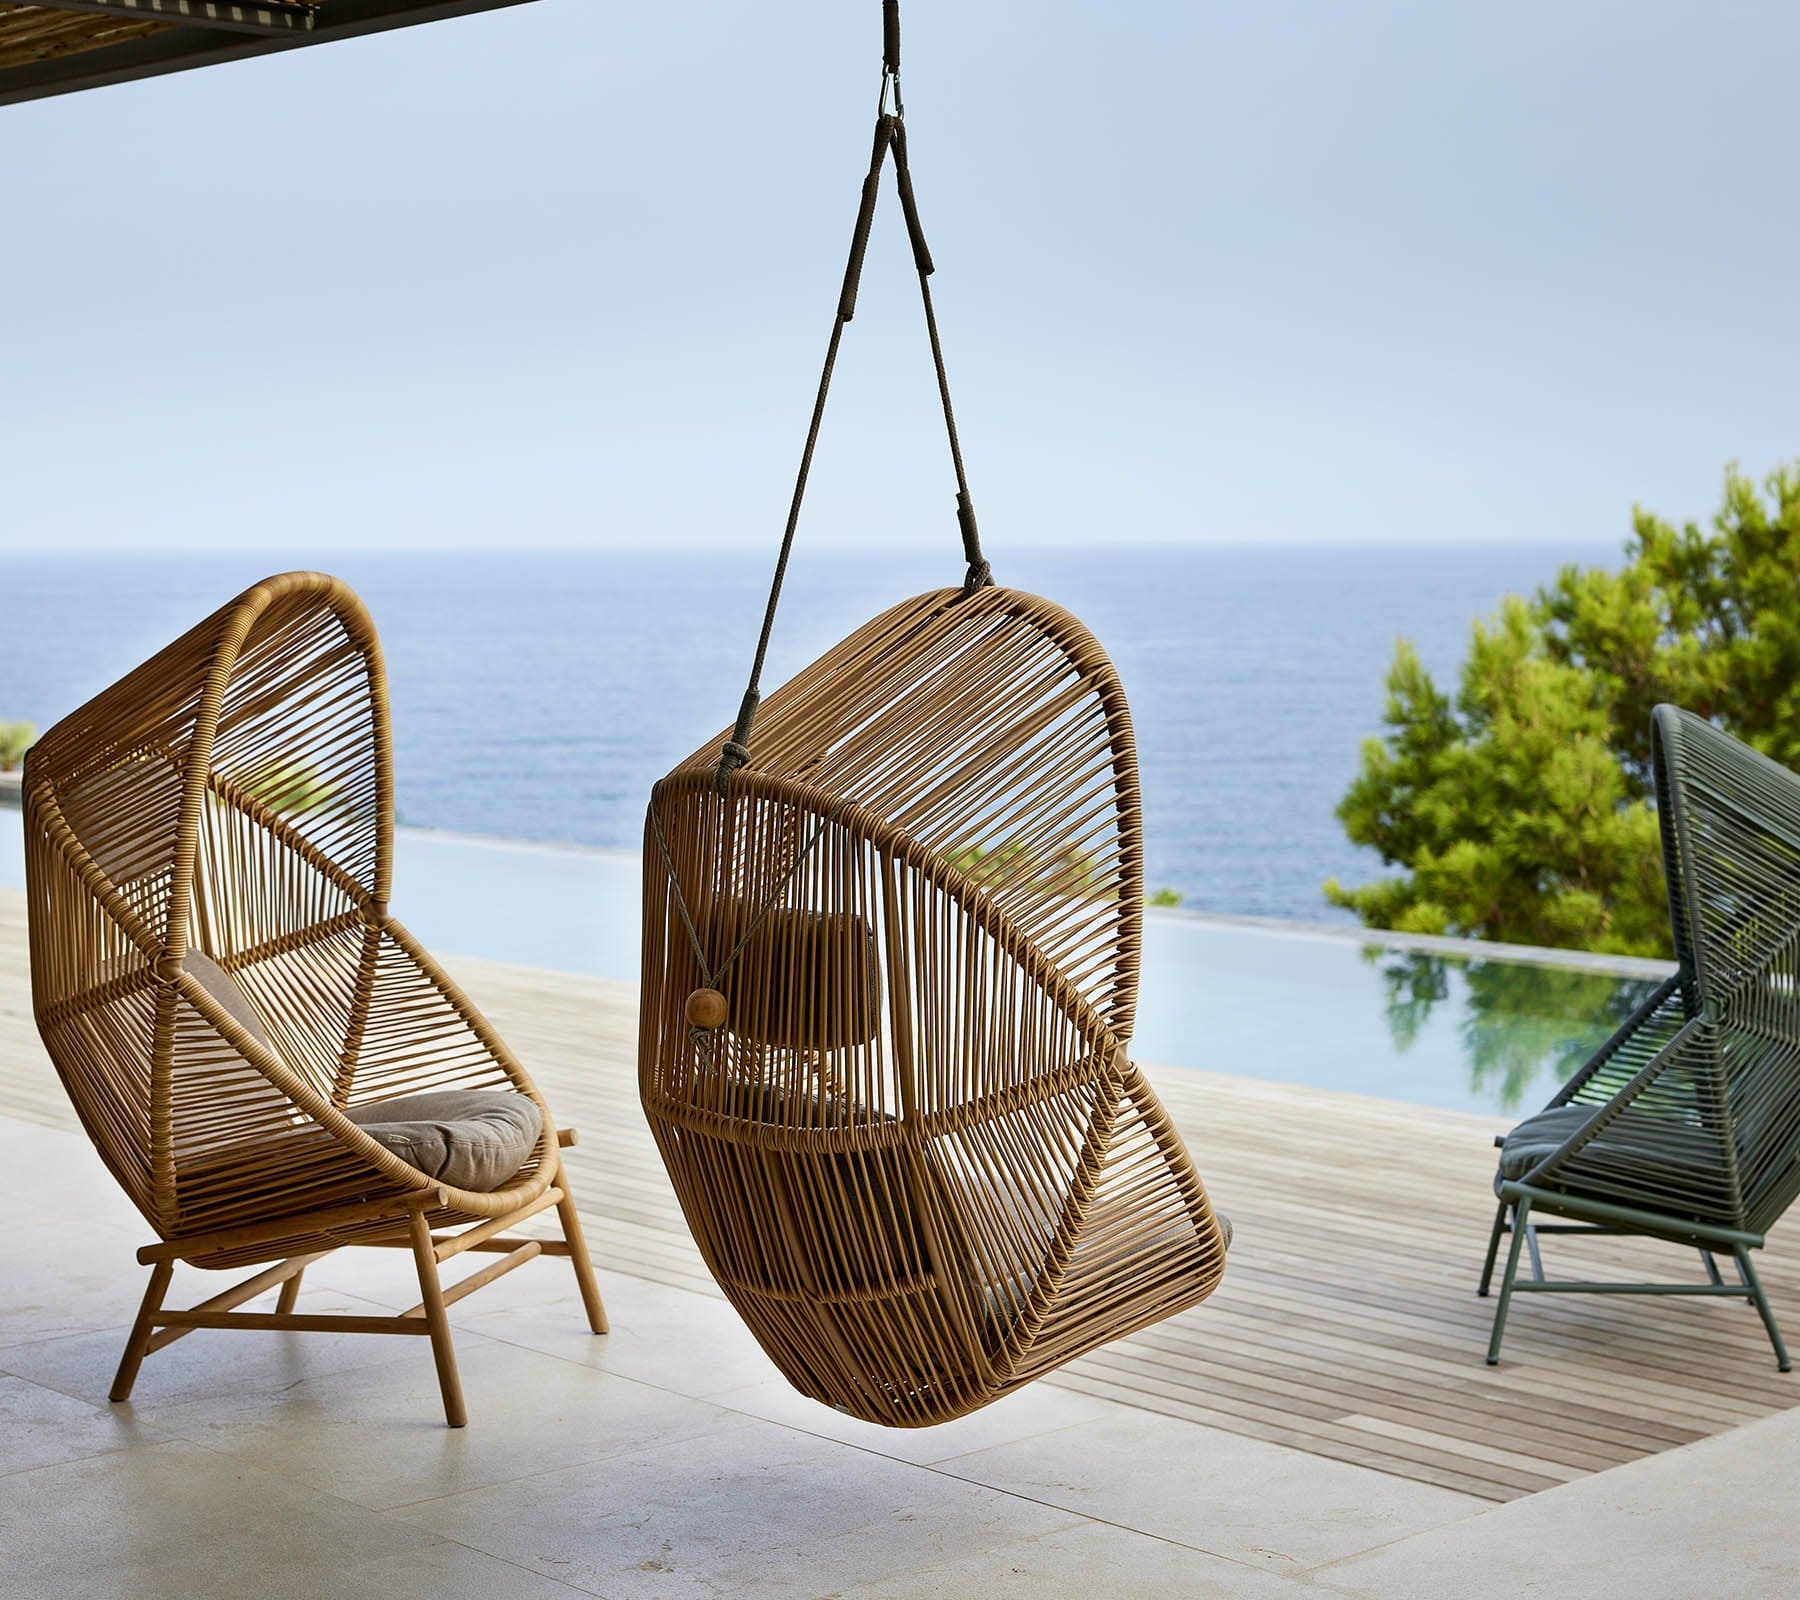 Boxhill's Hive Outdoor Hanging Chair Natural and Dusty Green Frame lifestyle image beside the pool